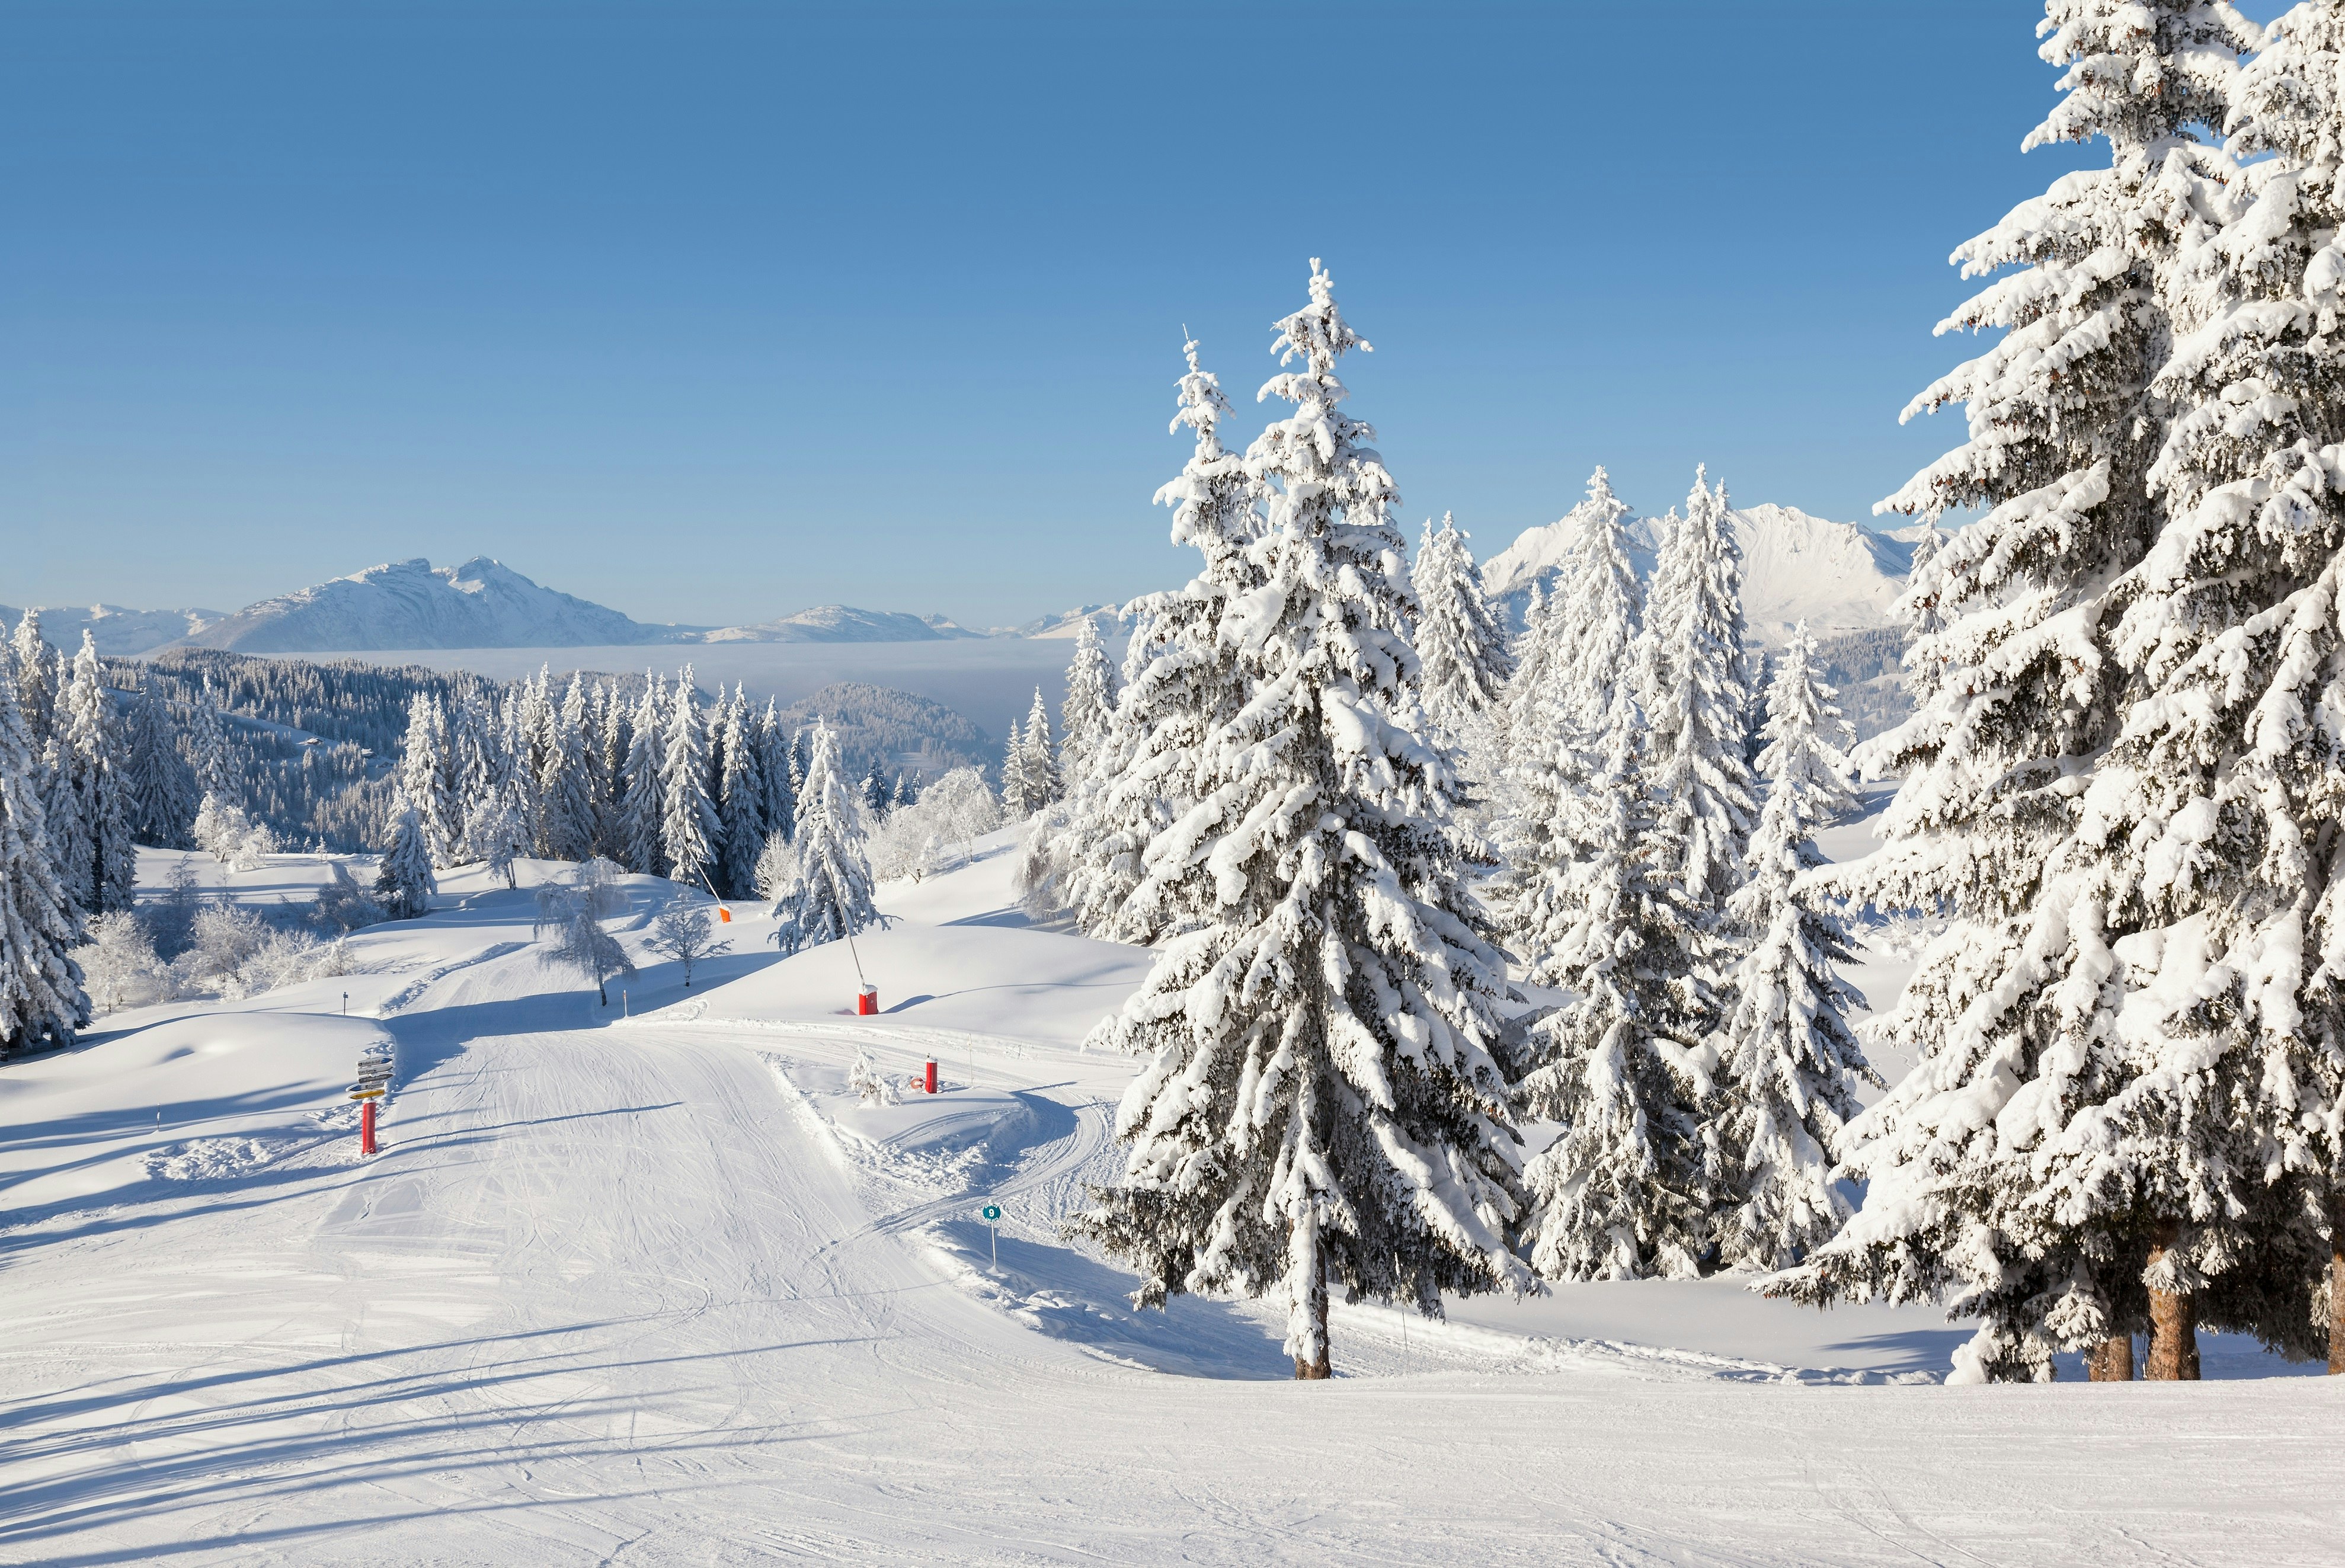 A sunny morning view of one of Les Gets' empty pistes, which is flanked by snowy trees on either side.